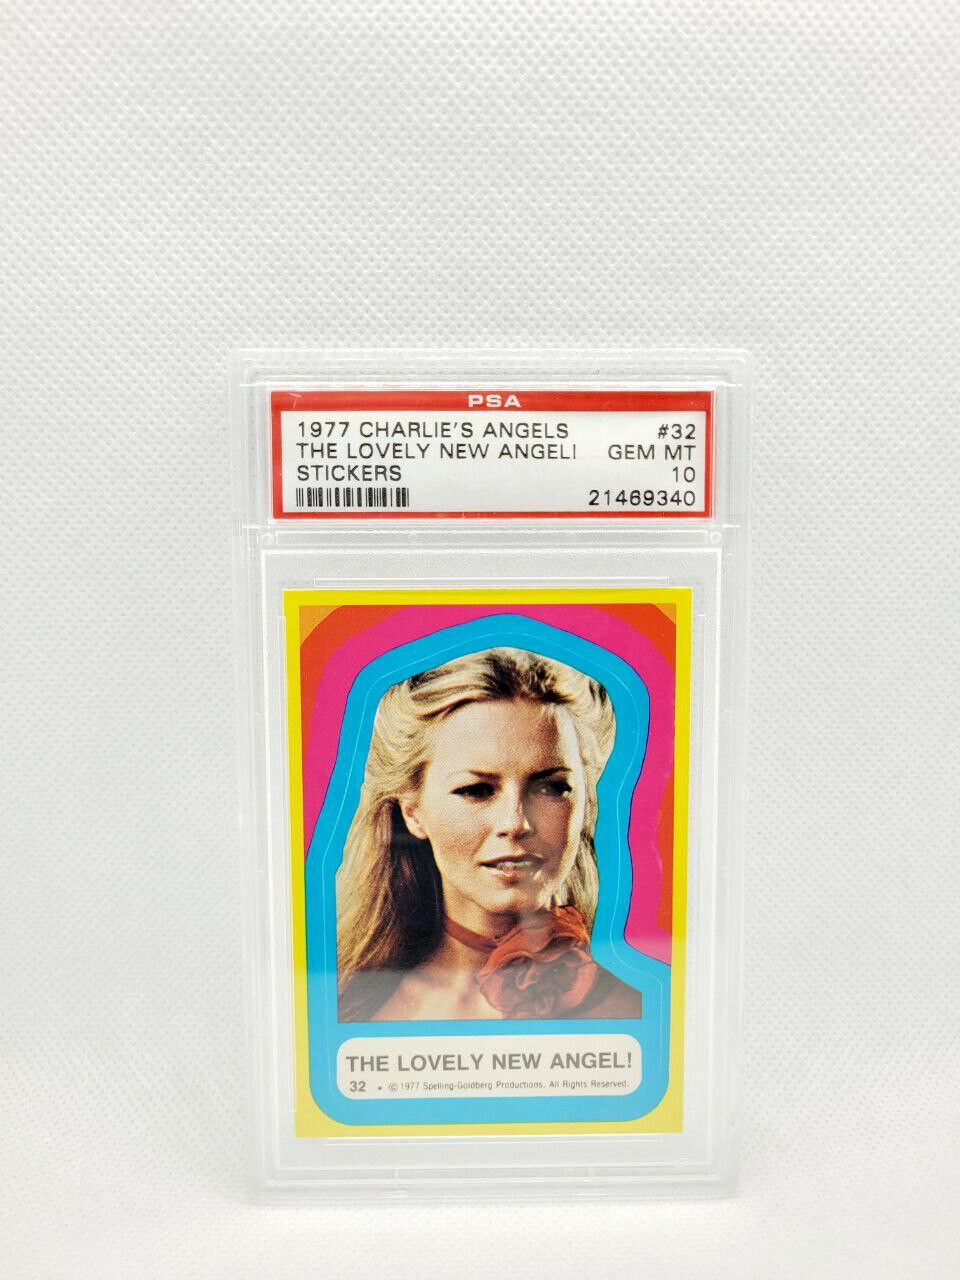 1977 Charlie's Angels #32 The Lovely New Angel Stickers PSA 10